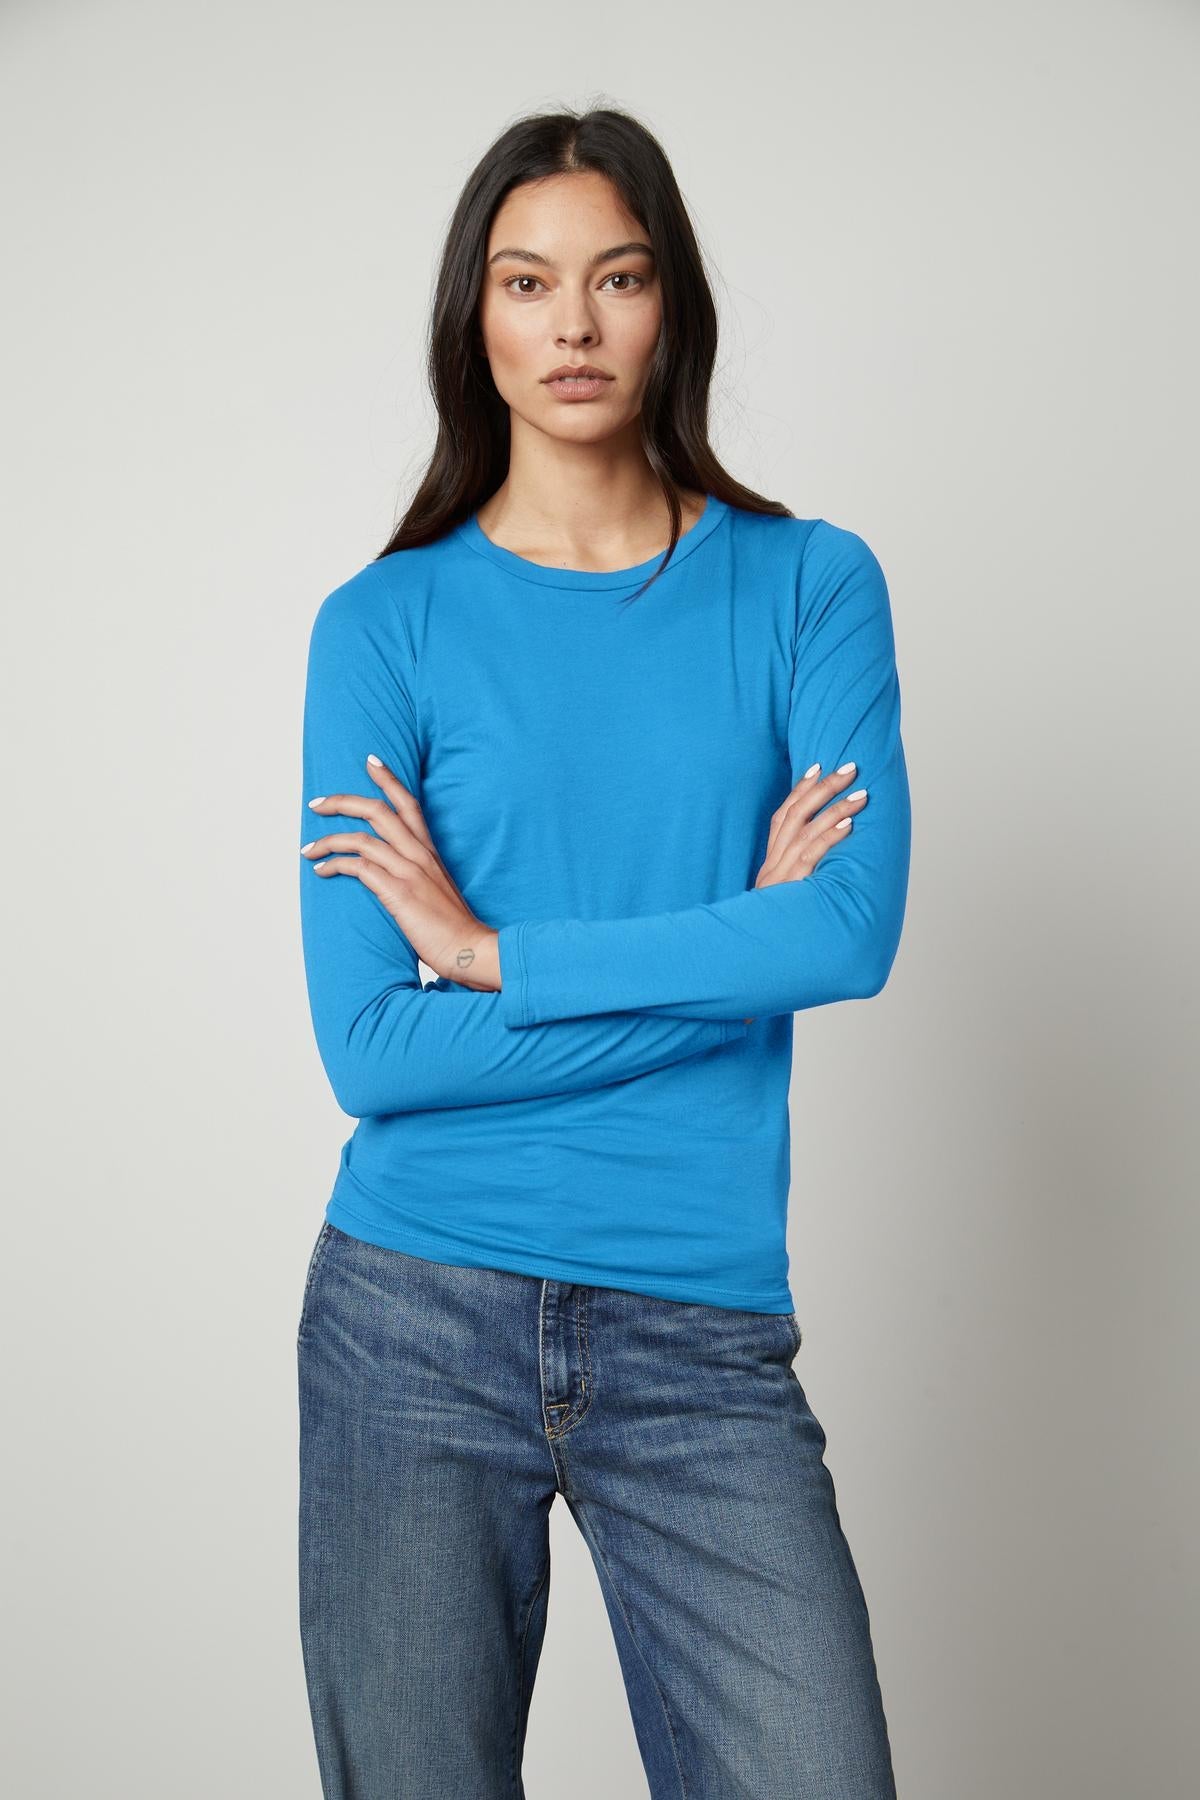 A woman wearing a Velvet by Graham & Spencer ZOFINA GAUZY WHISPER FITTED CREW NECK TEE - perfection.-36594704810177